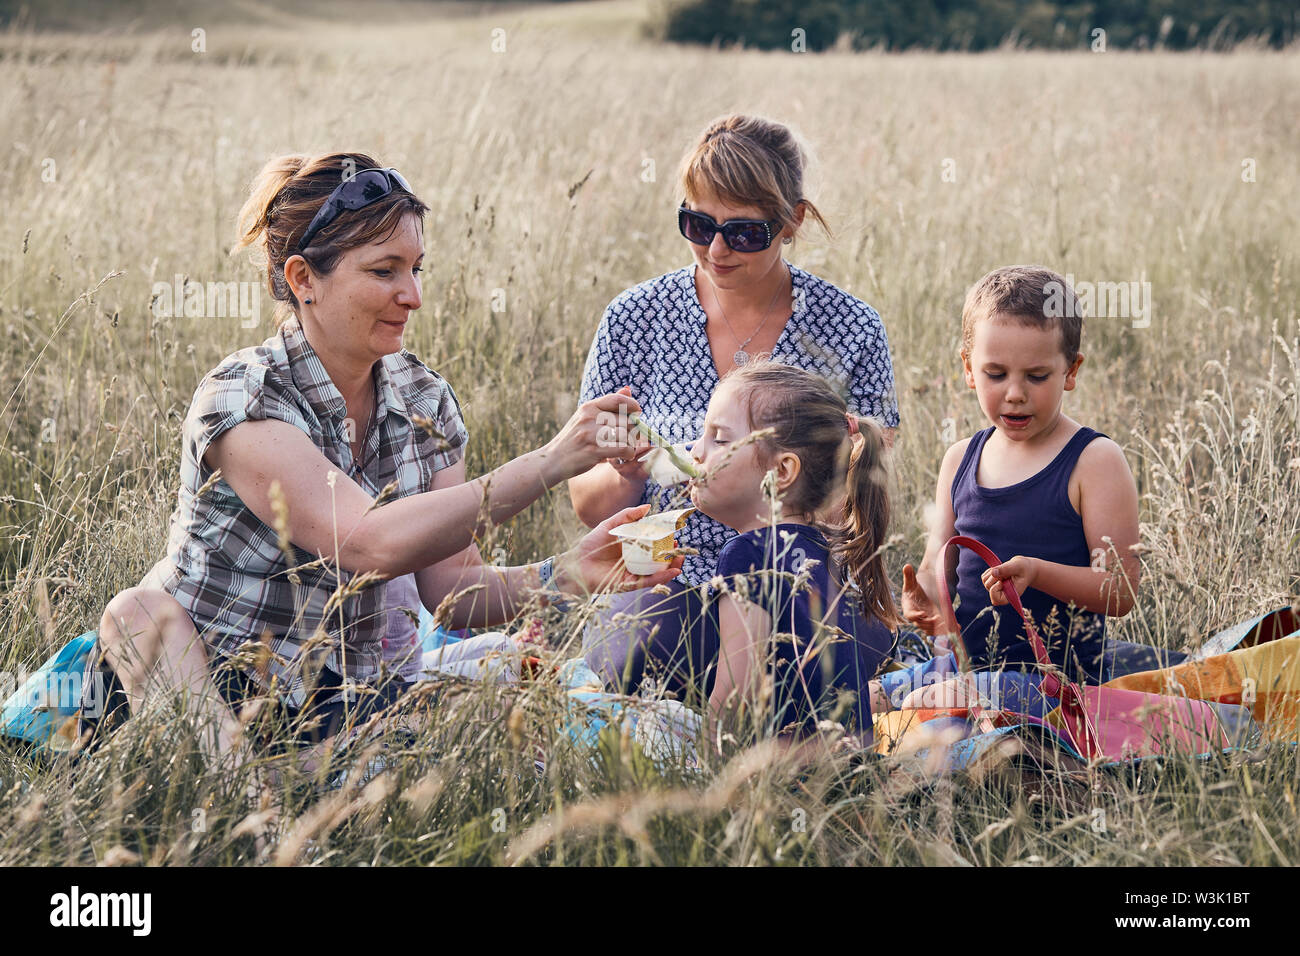 Families and friends spending time together on a meadow, close to nature. Mothers feeding kids, sitting on a blanket, on grass. Candid people, real mo Stock Photo